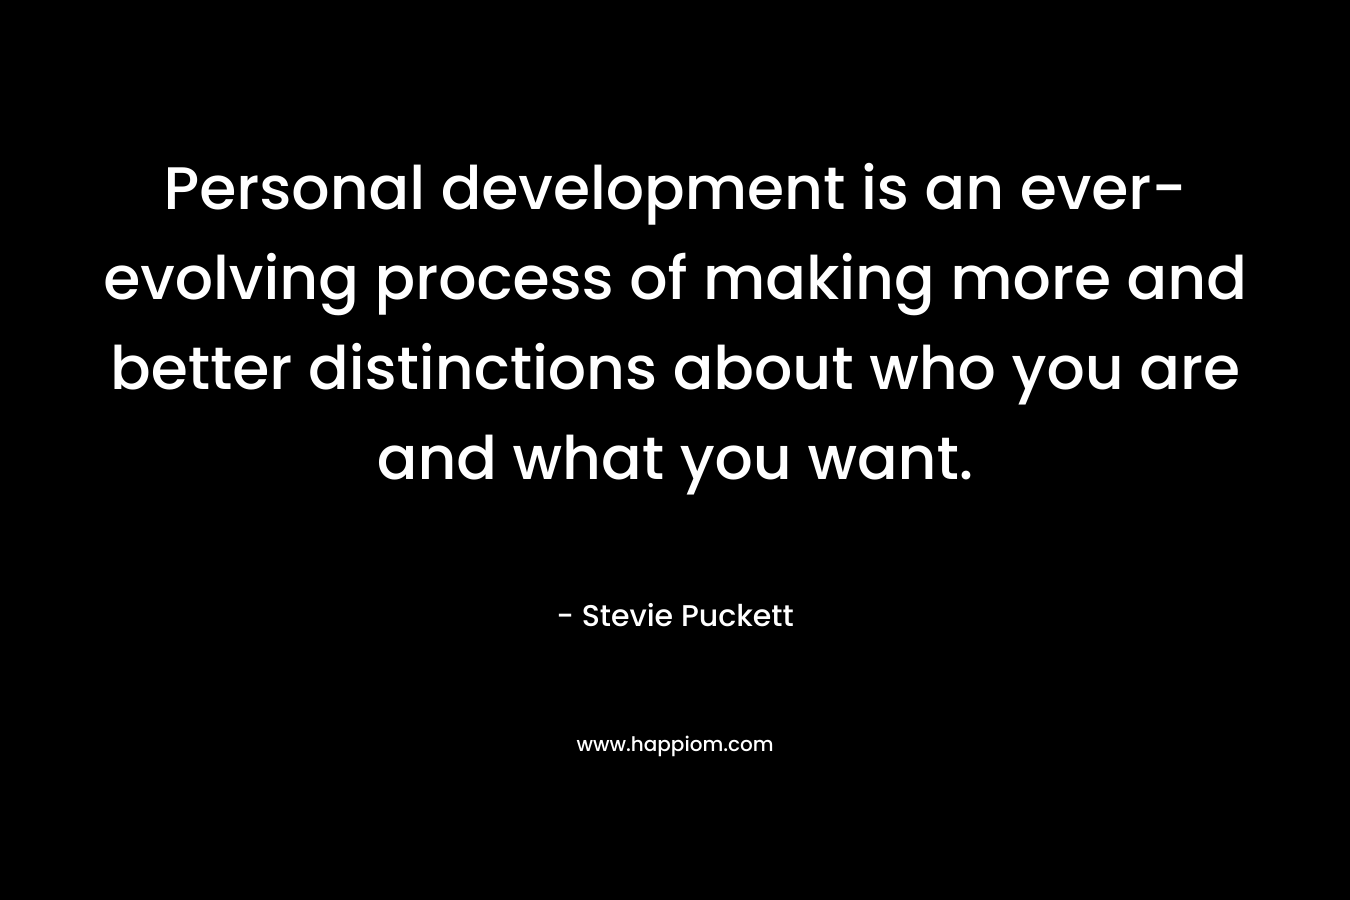 Personal development is an ever-evolving process of making more and better distinctions about who you are and what you want.